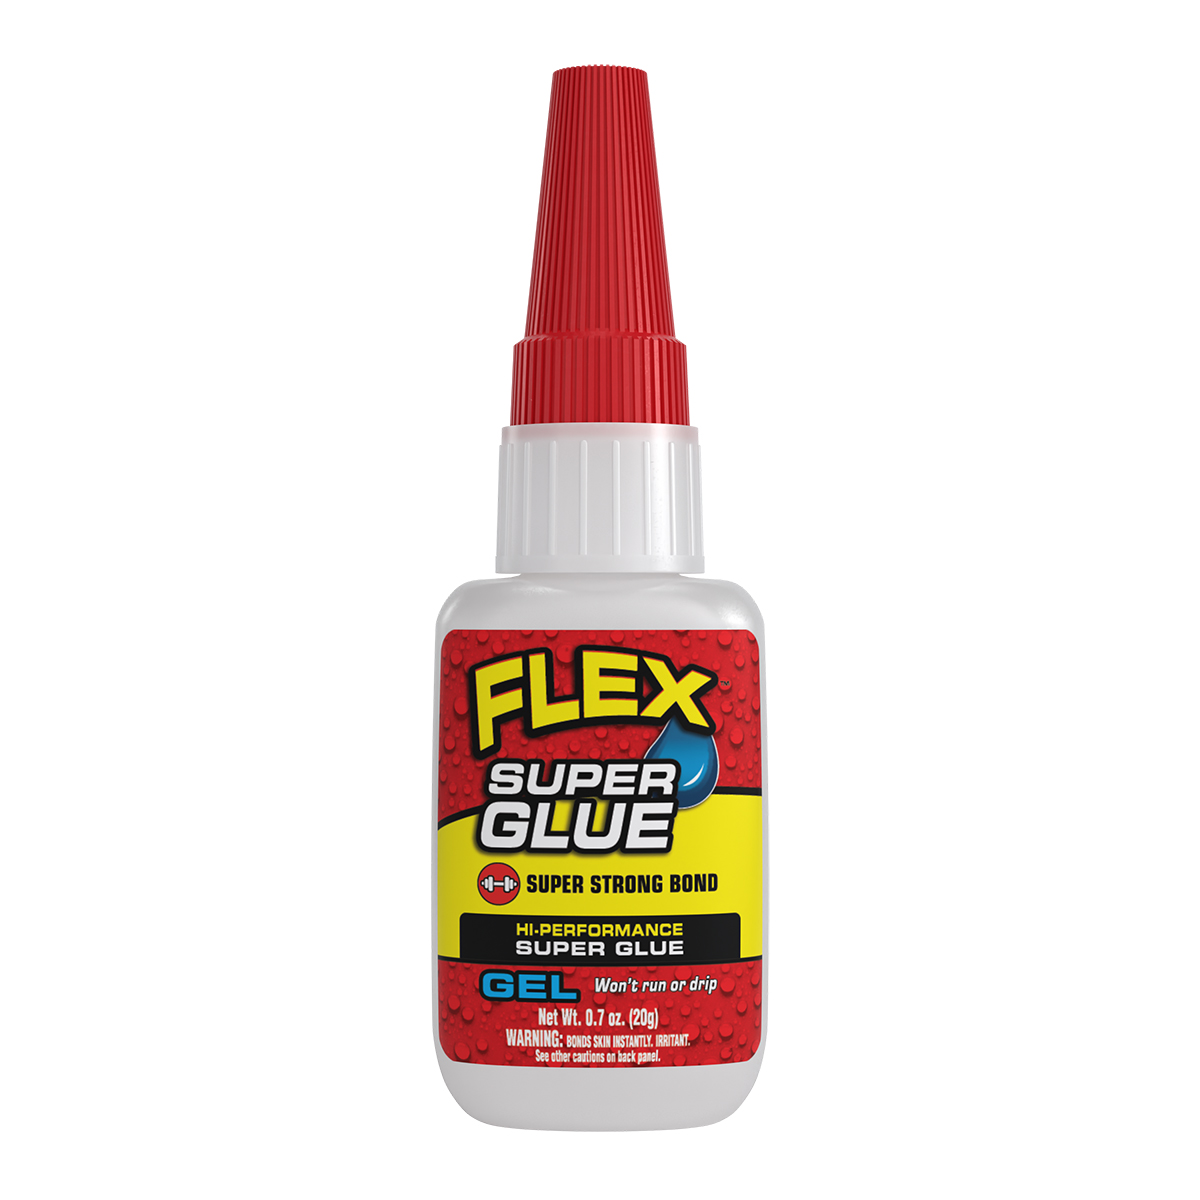 Flex Super Glue Gel Strong Precision Tip Glue for Smooth Bonds on Vertical and Uneven Surfaces, 20 Grams - image 1 of 7